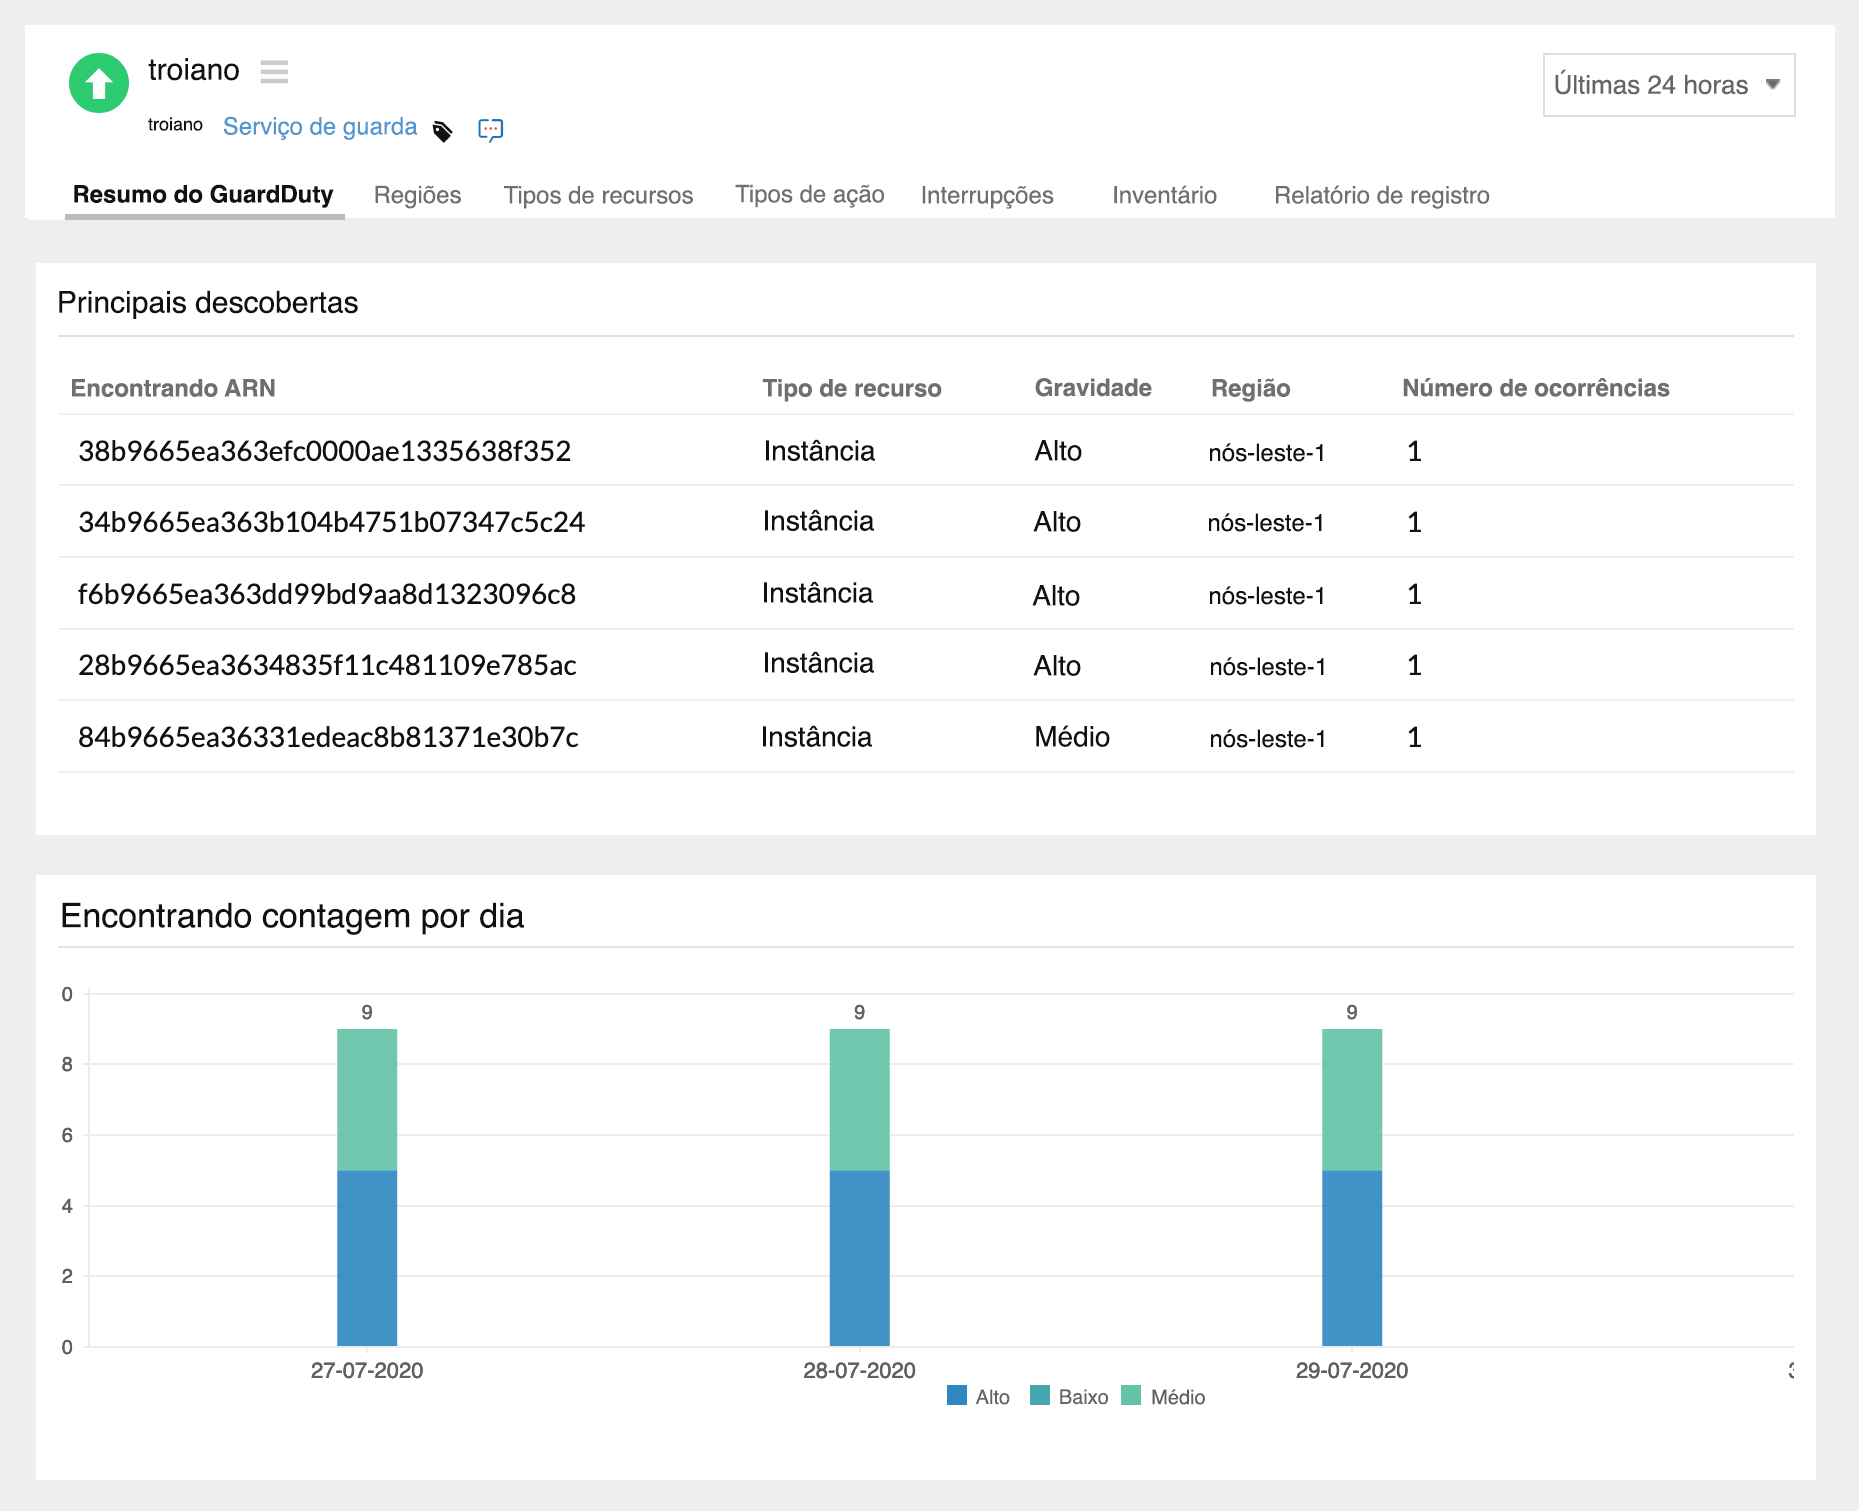 View and analyze AWS GuardDuty findings